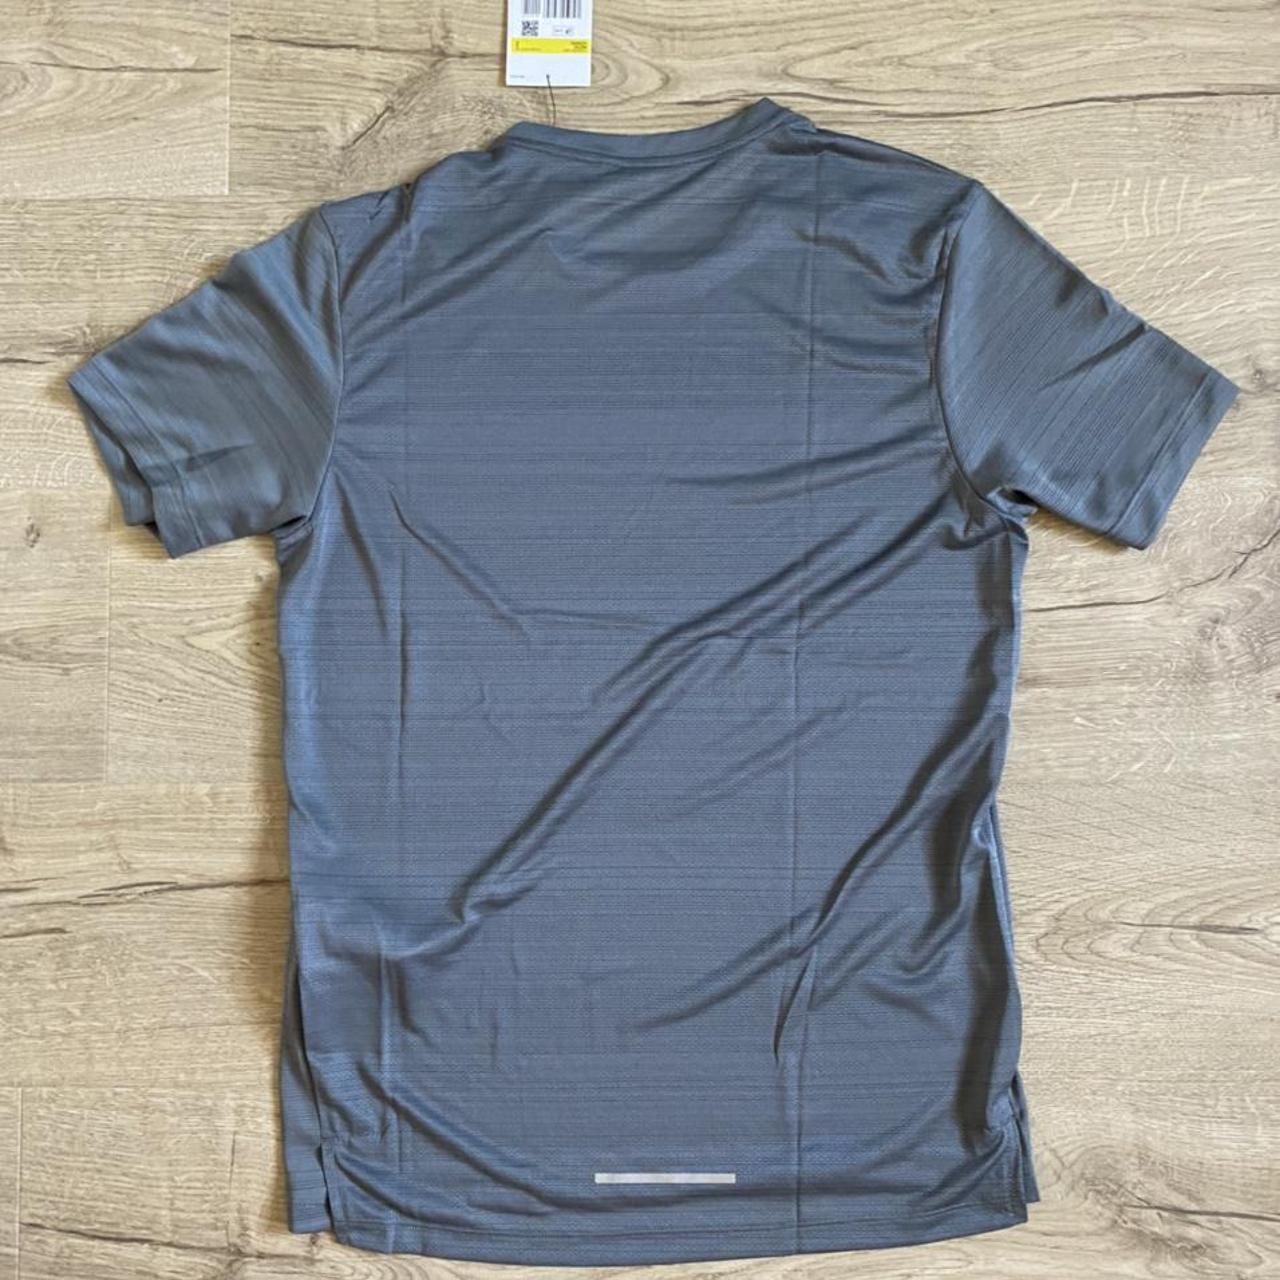 Product Image 2 - Nike Charcoal Colour Running T